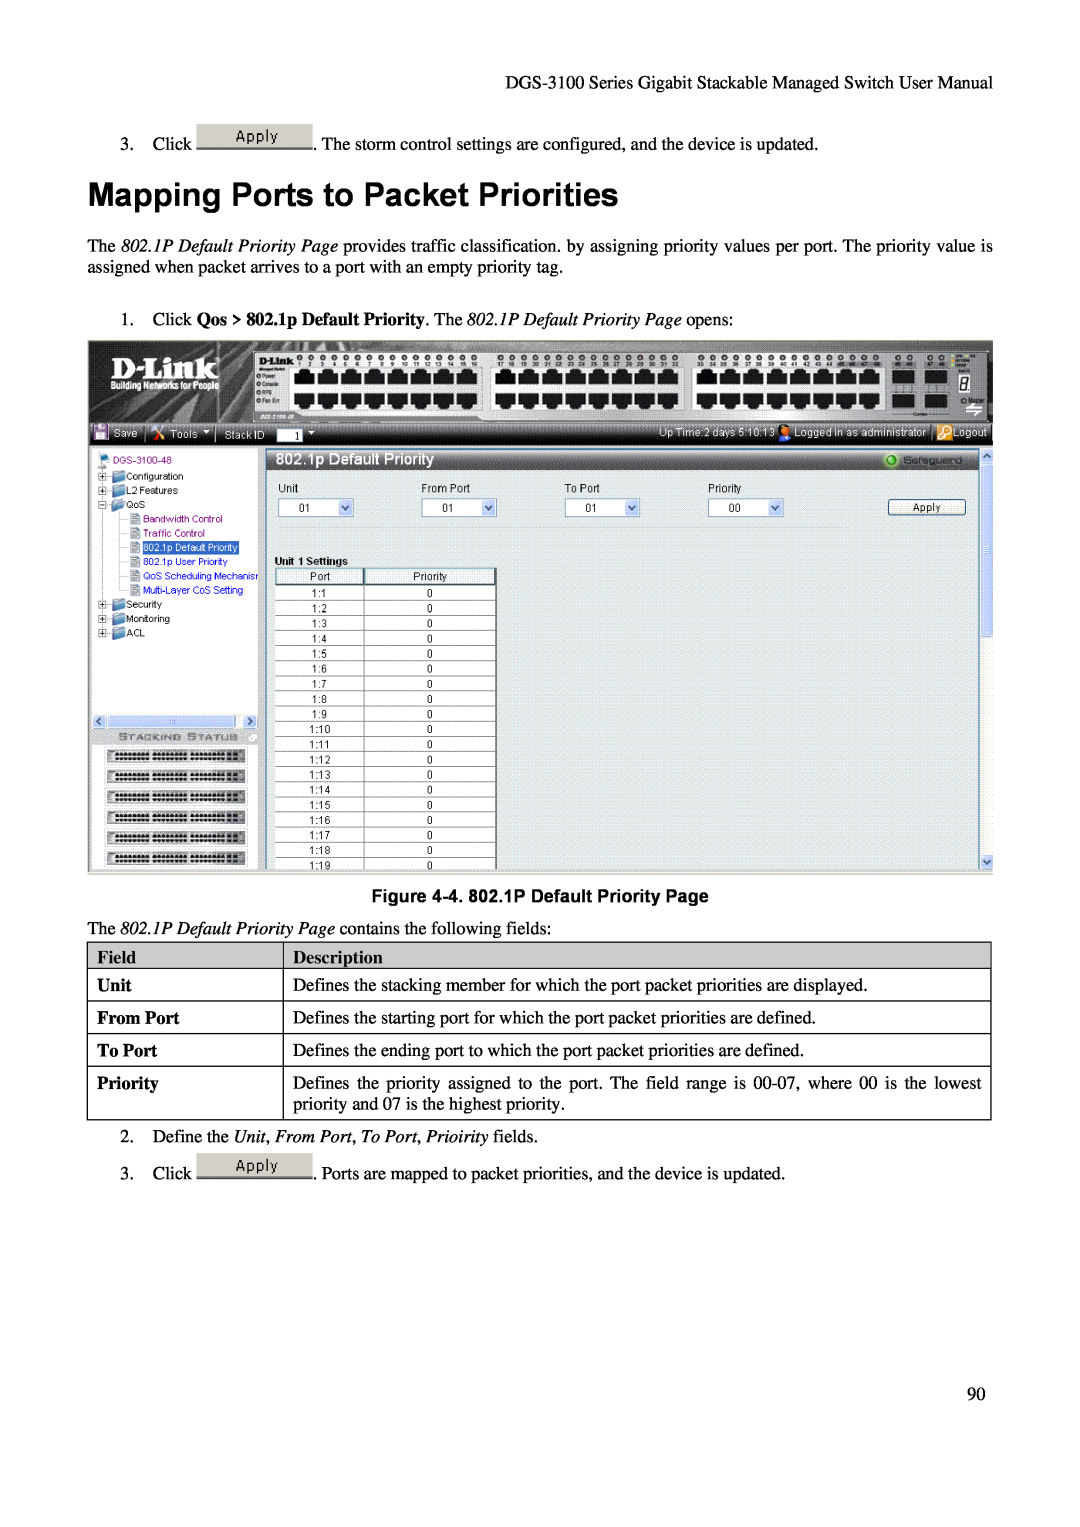 D-Link DGS-3100 user manual Mapping Ports to Packet Priorities, 4. 802.1P Default Priority Page, Description 